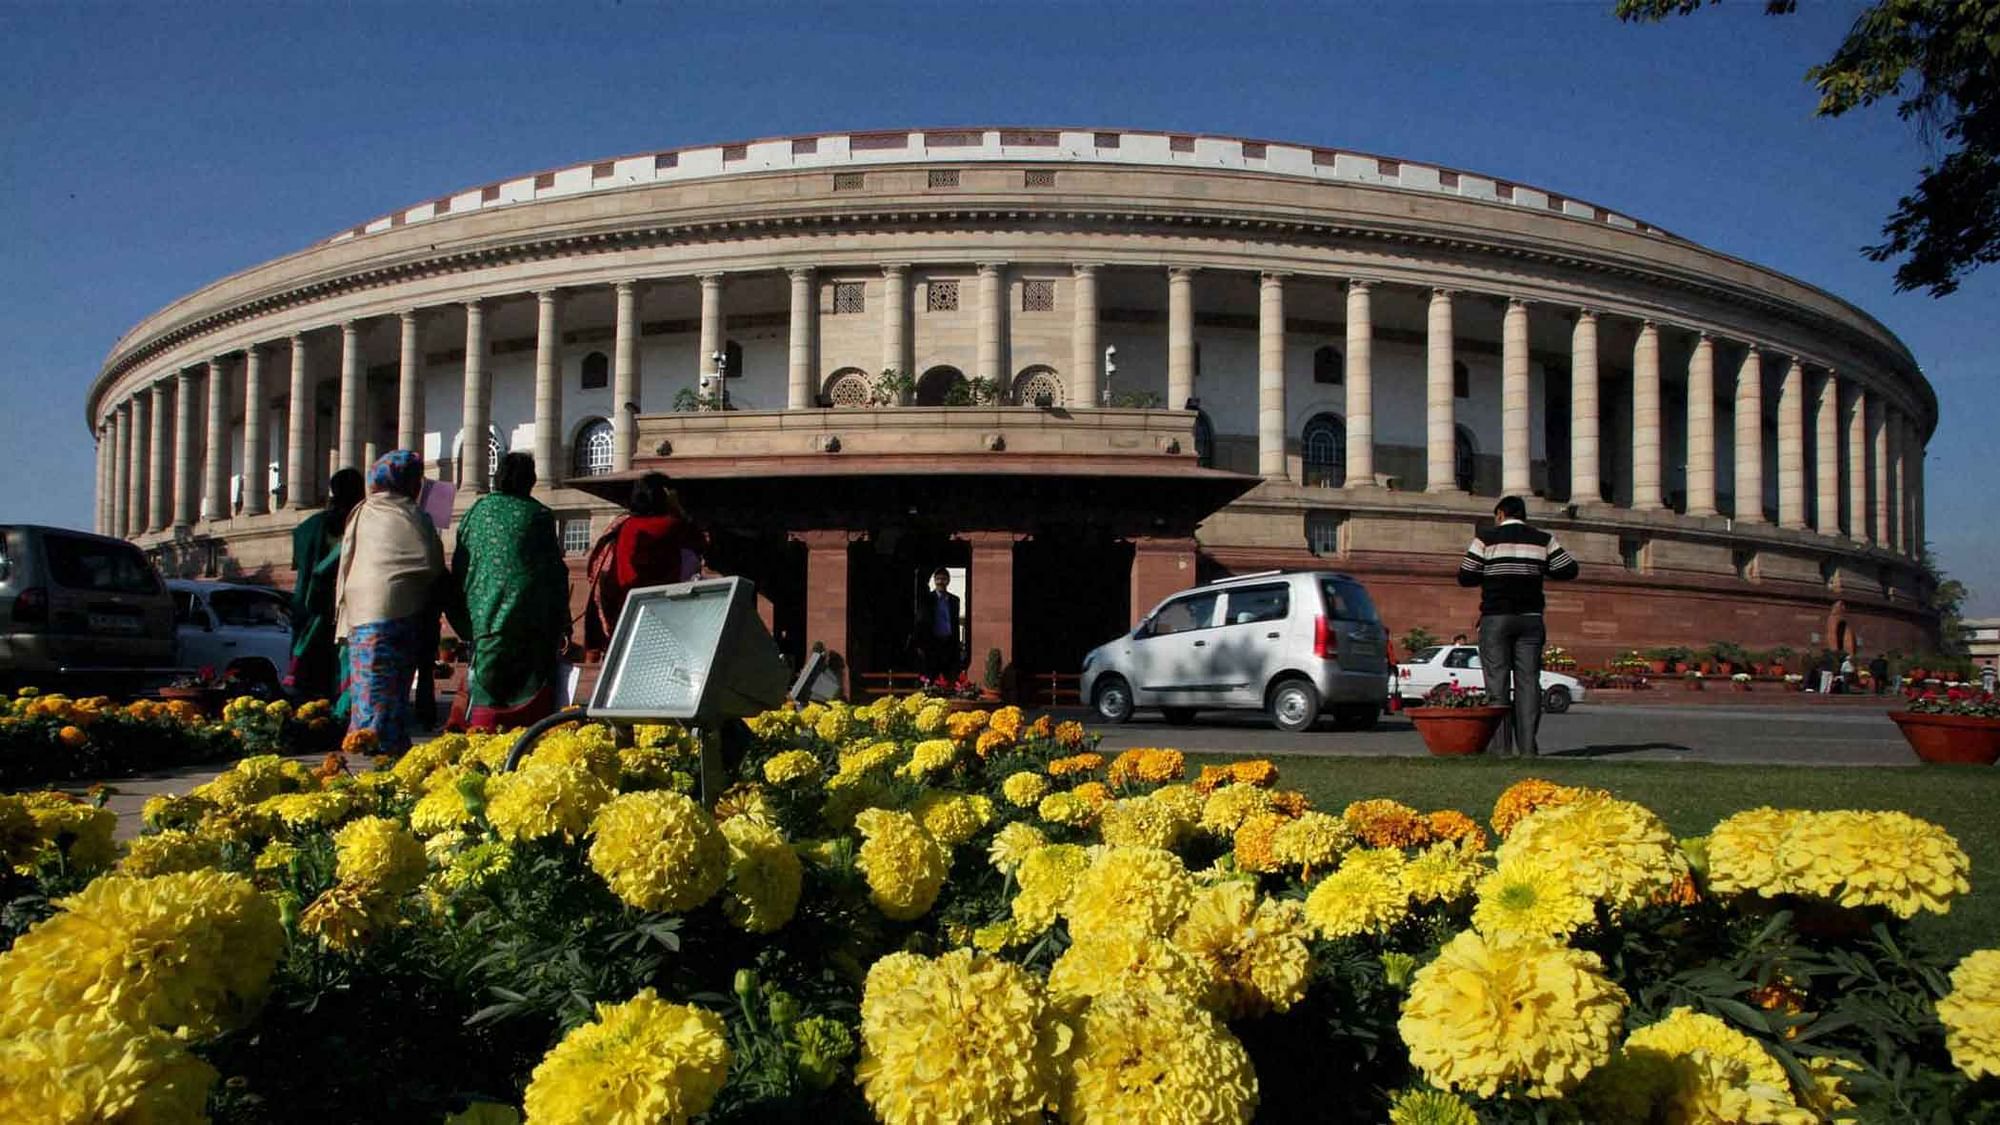 The Monsoon Session of Lok Sabha will begin on 14 September, with President Ram Nath Kovind issuing a notification on Monday, 31 August.